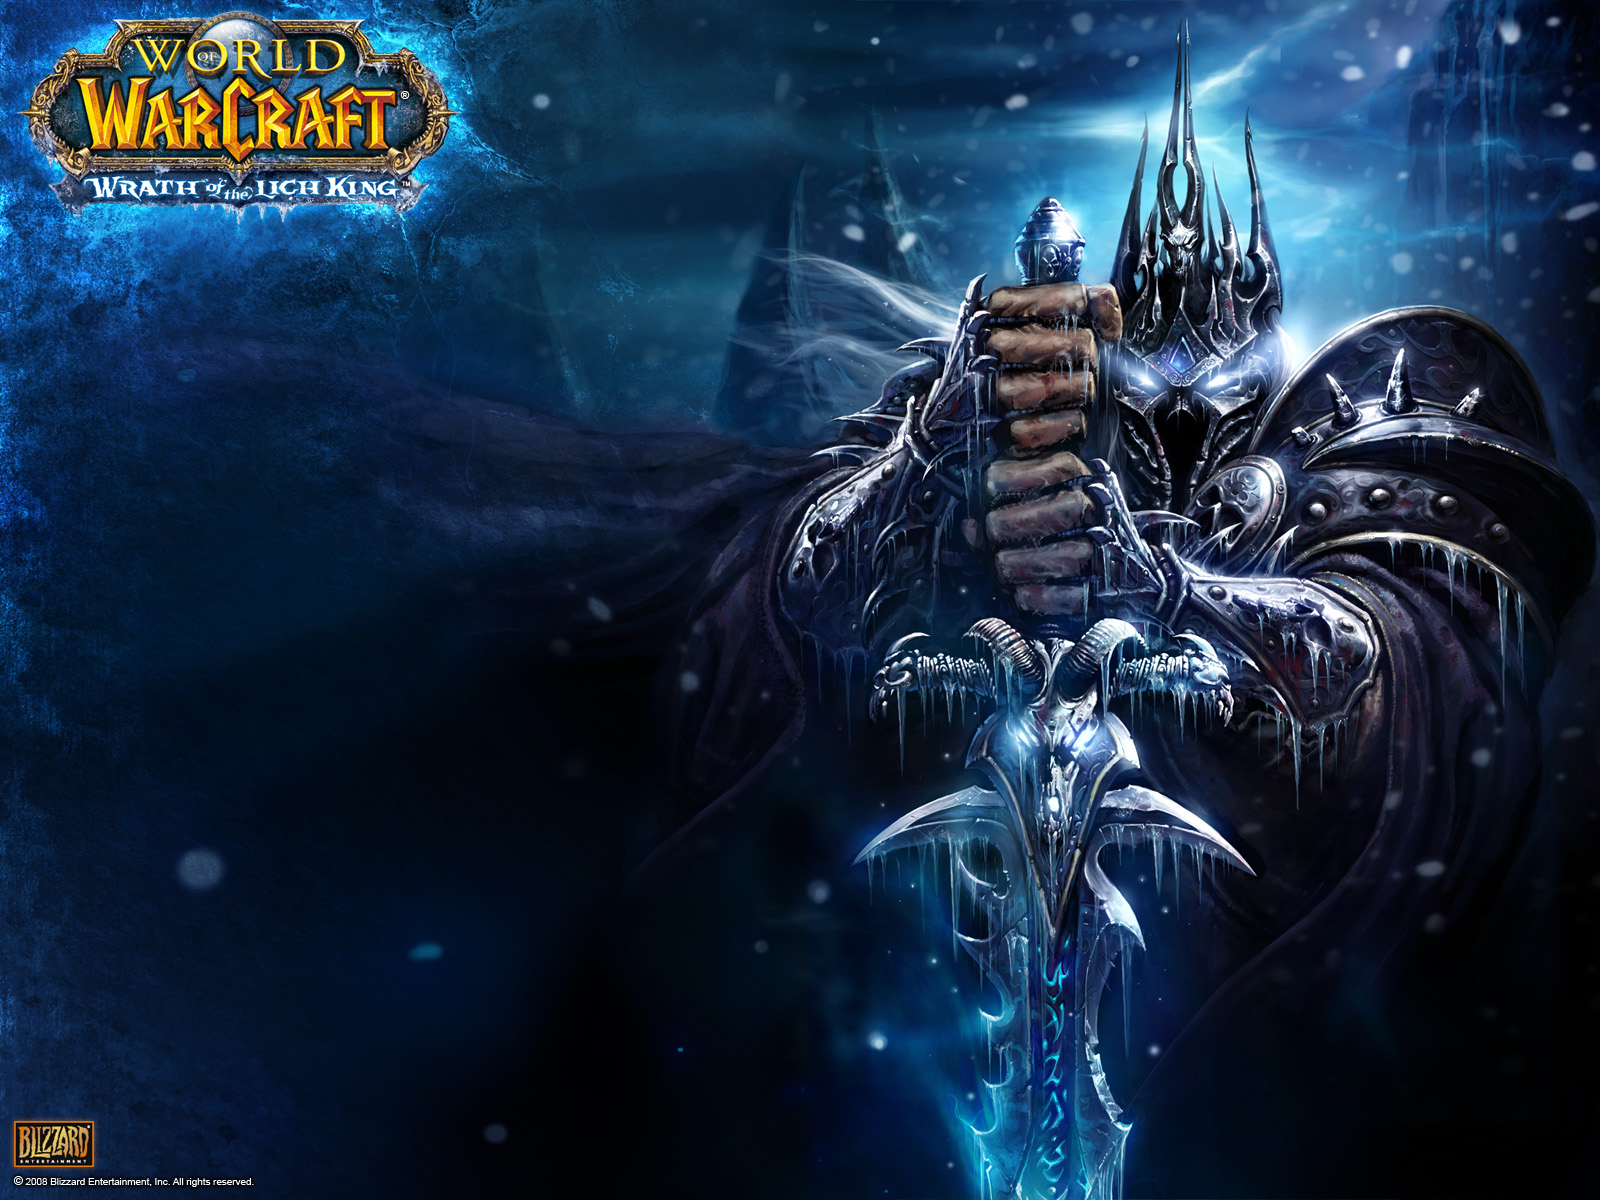  Lich King Wallpapers World of Warcraft Wrath of the Lich King